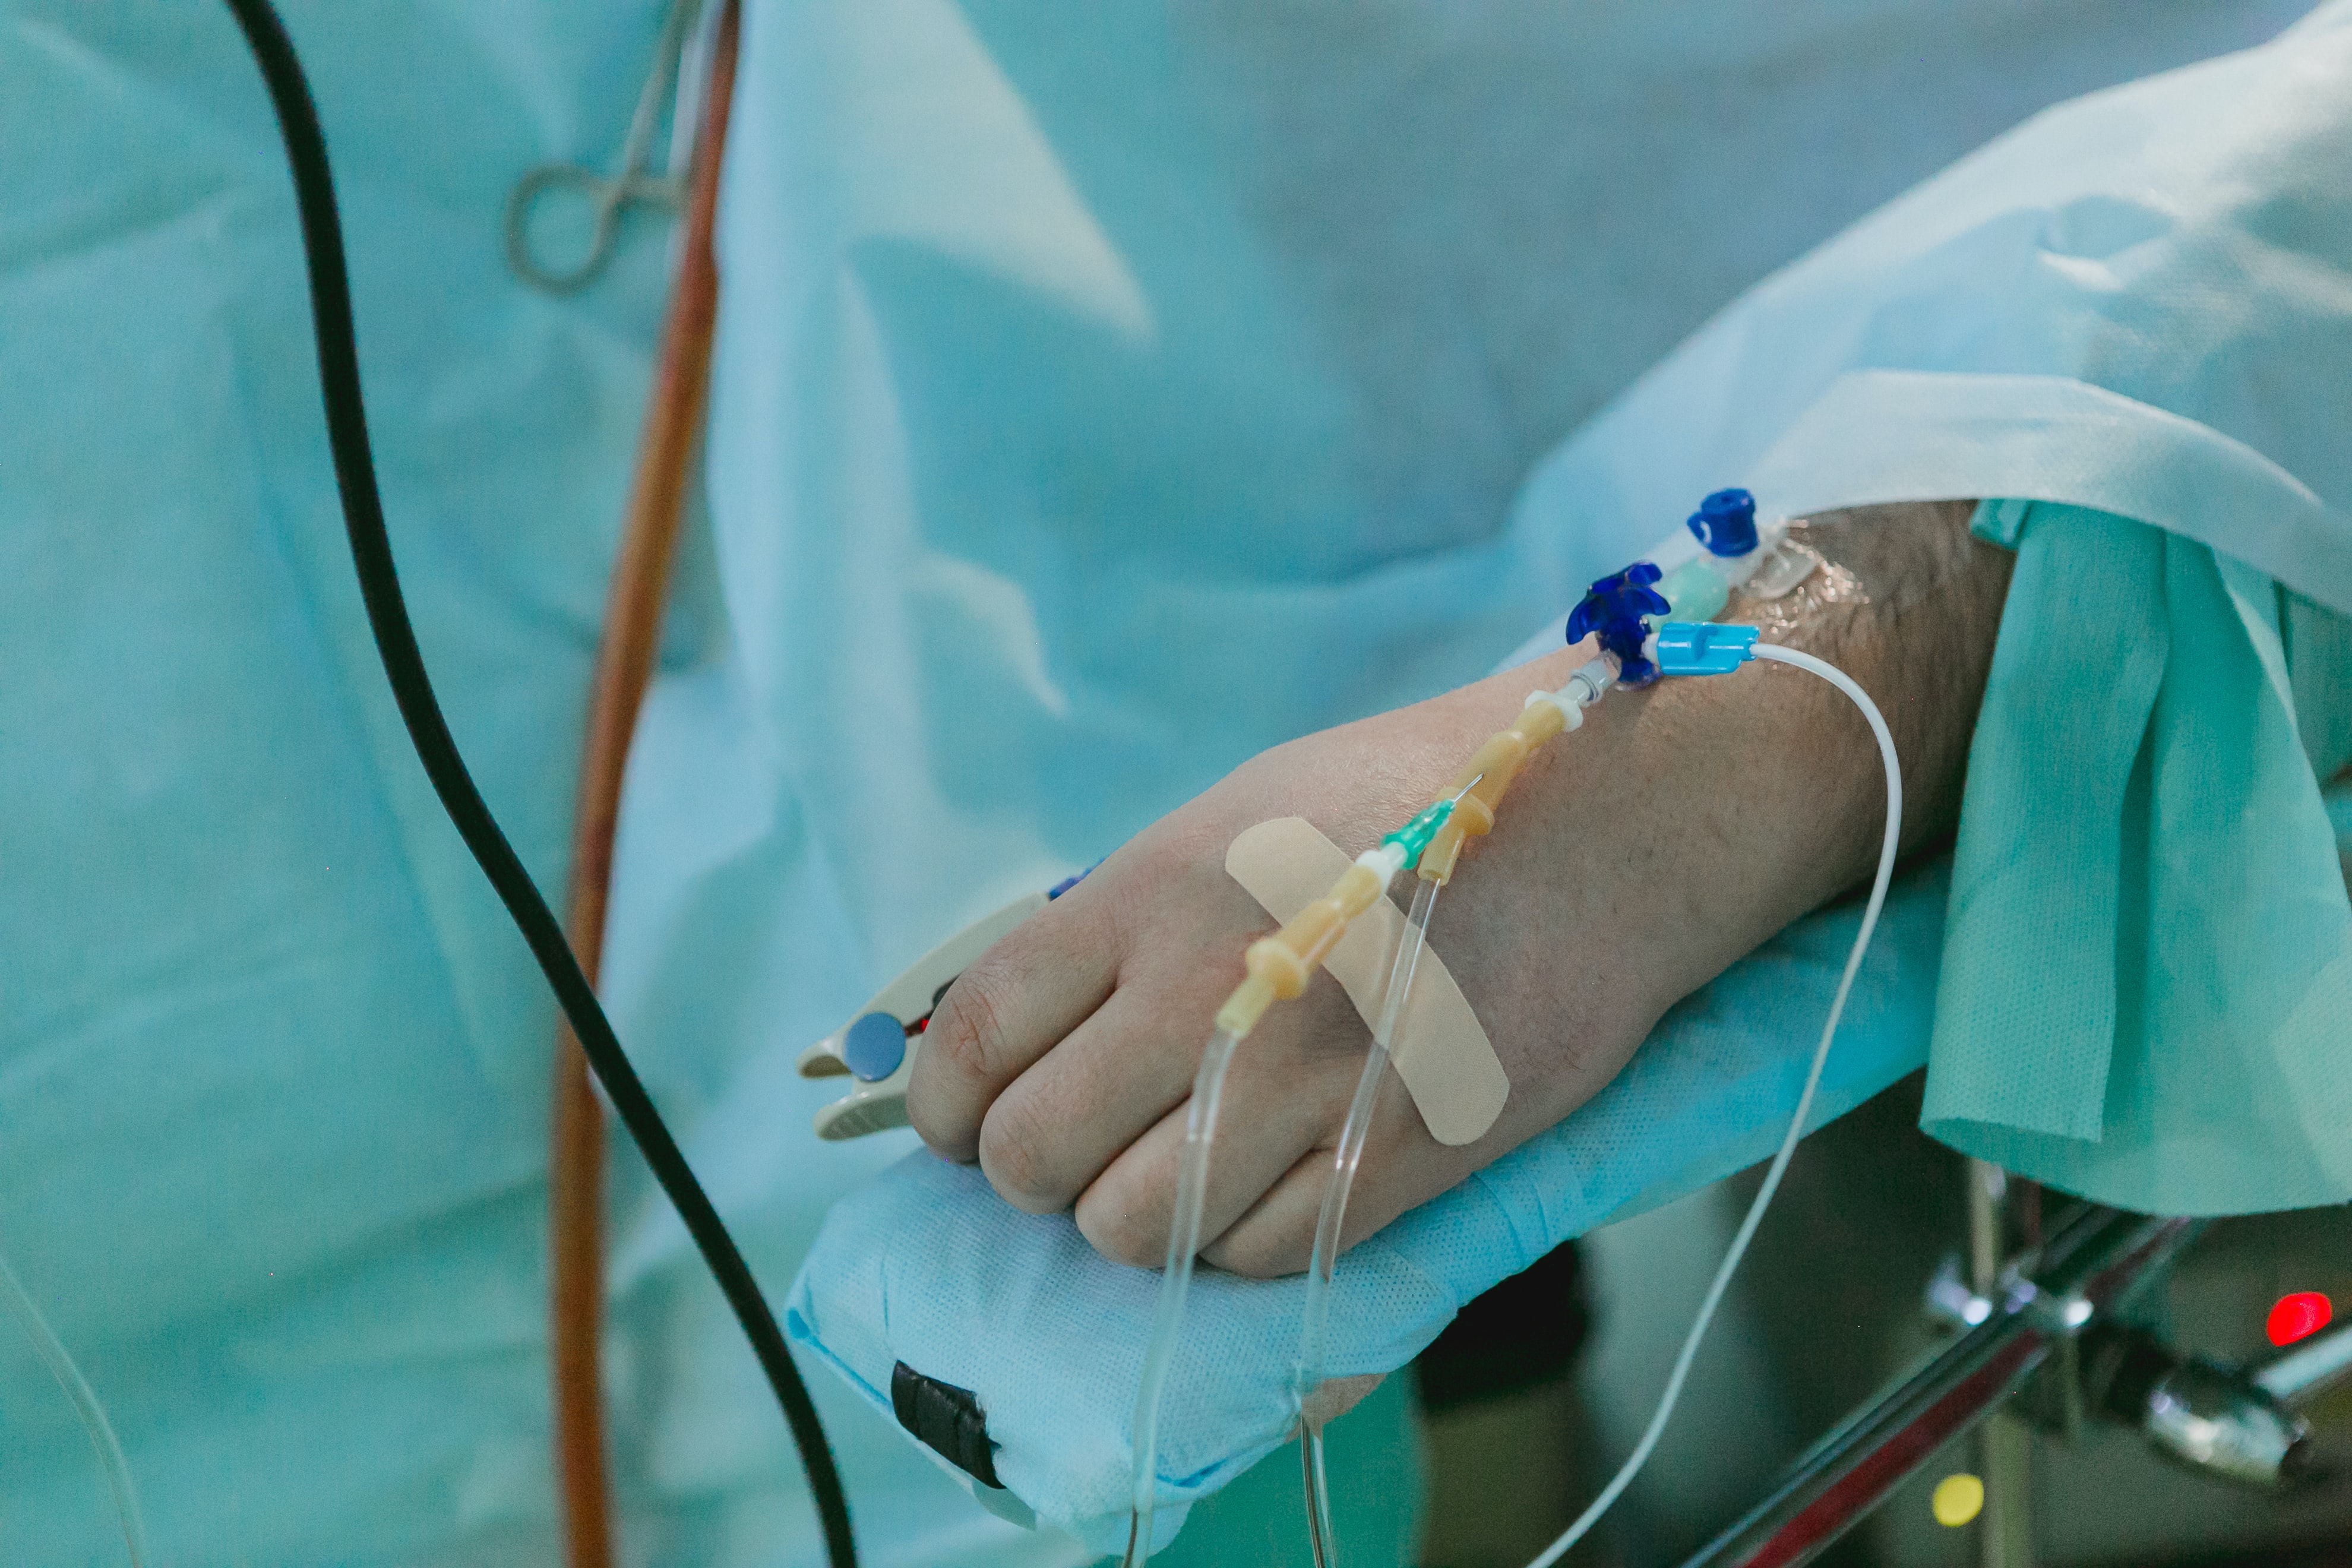 A hospital patient with an IV line inserted into their hand